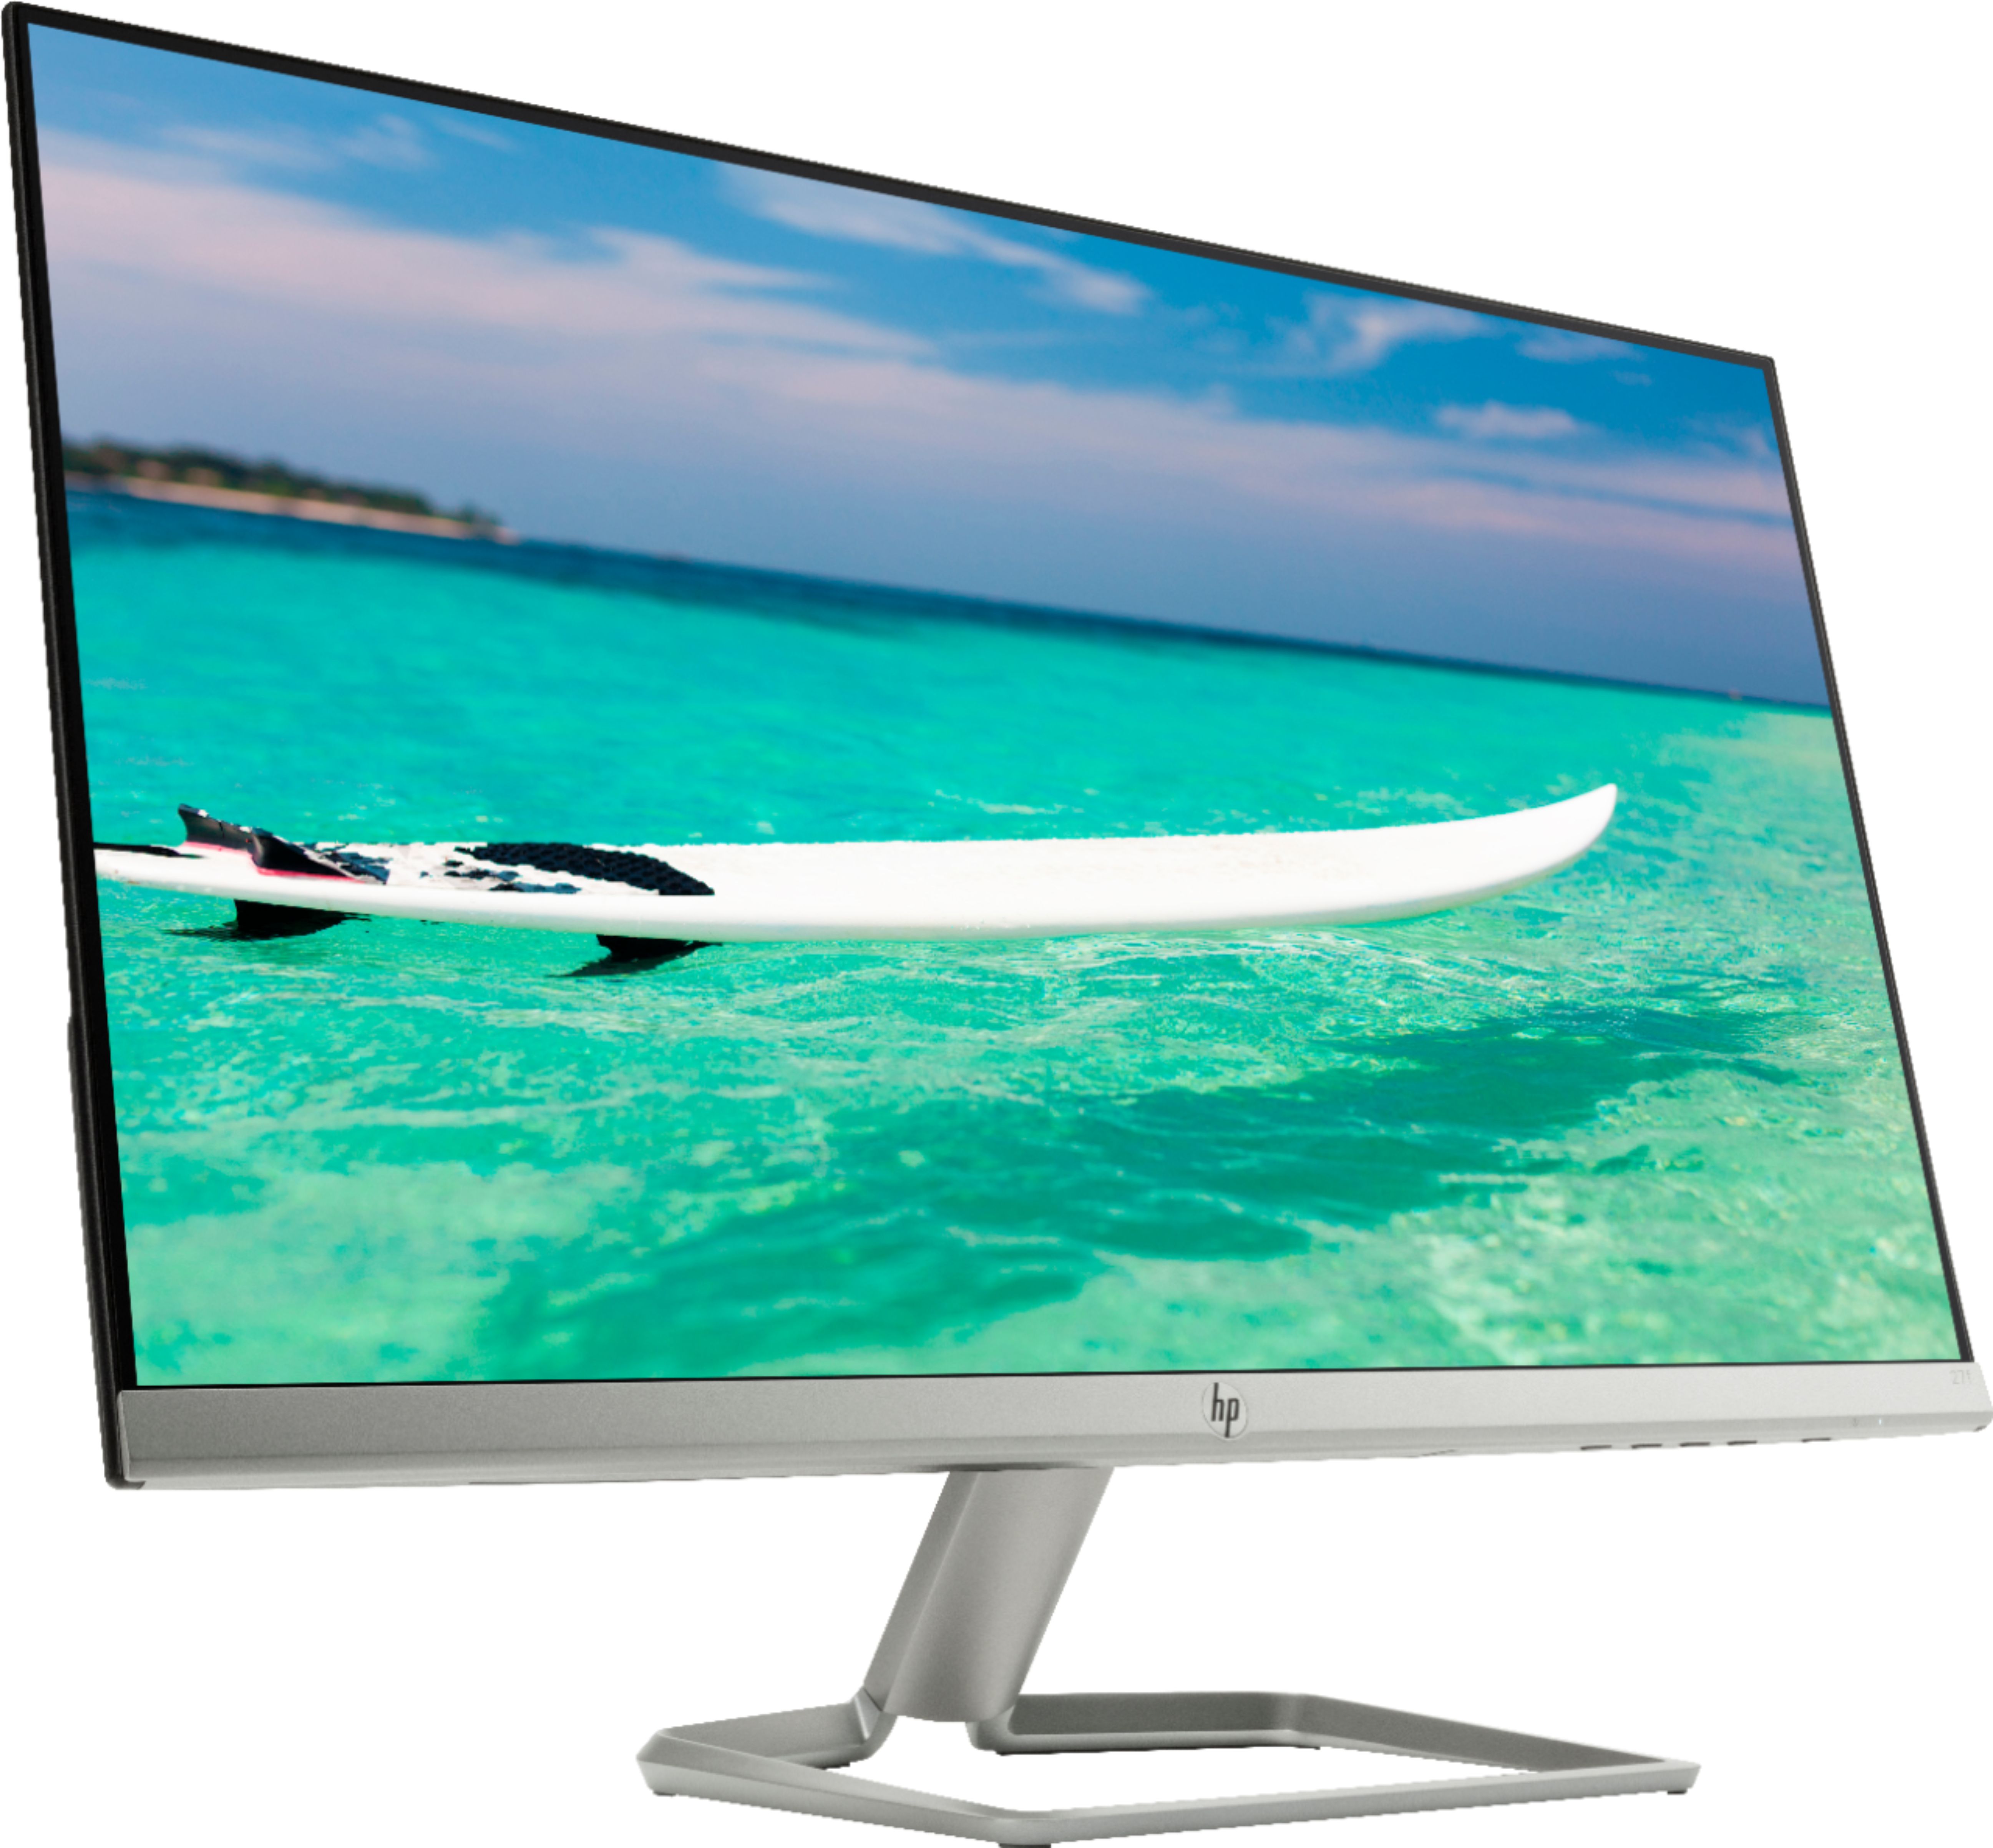 Angle View: HP - Geek Squad Certified Refurbished 27" LED QHD Monitor - Pike Silver